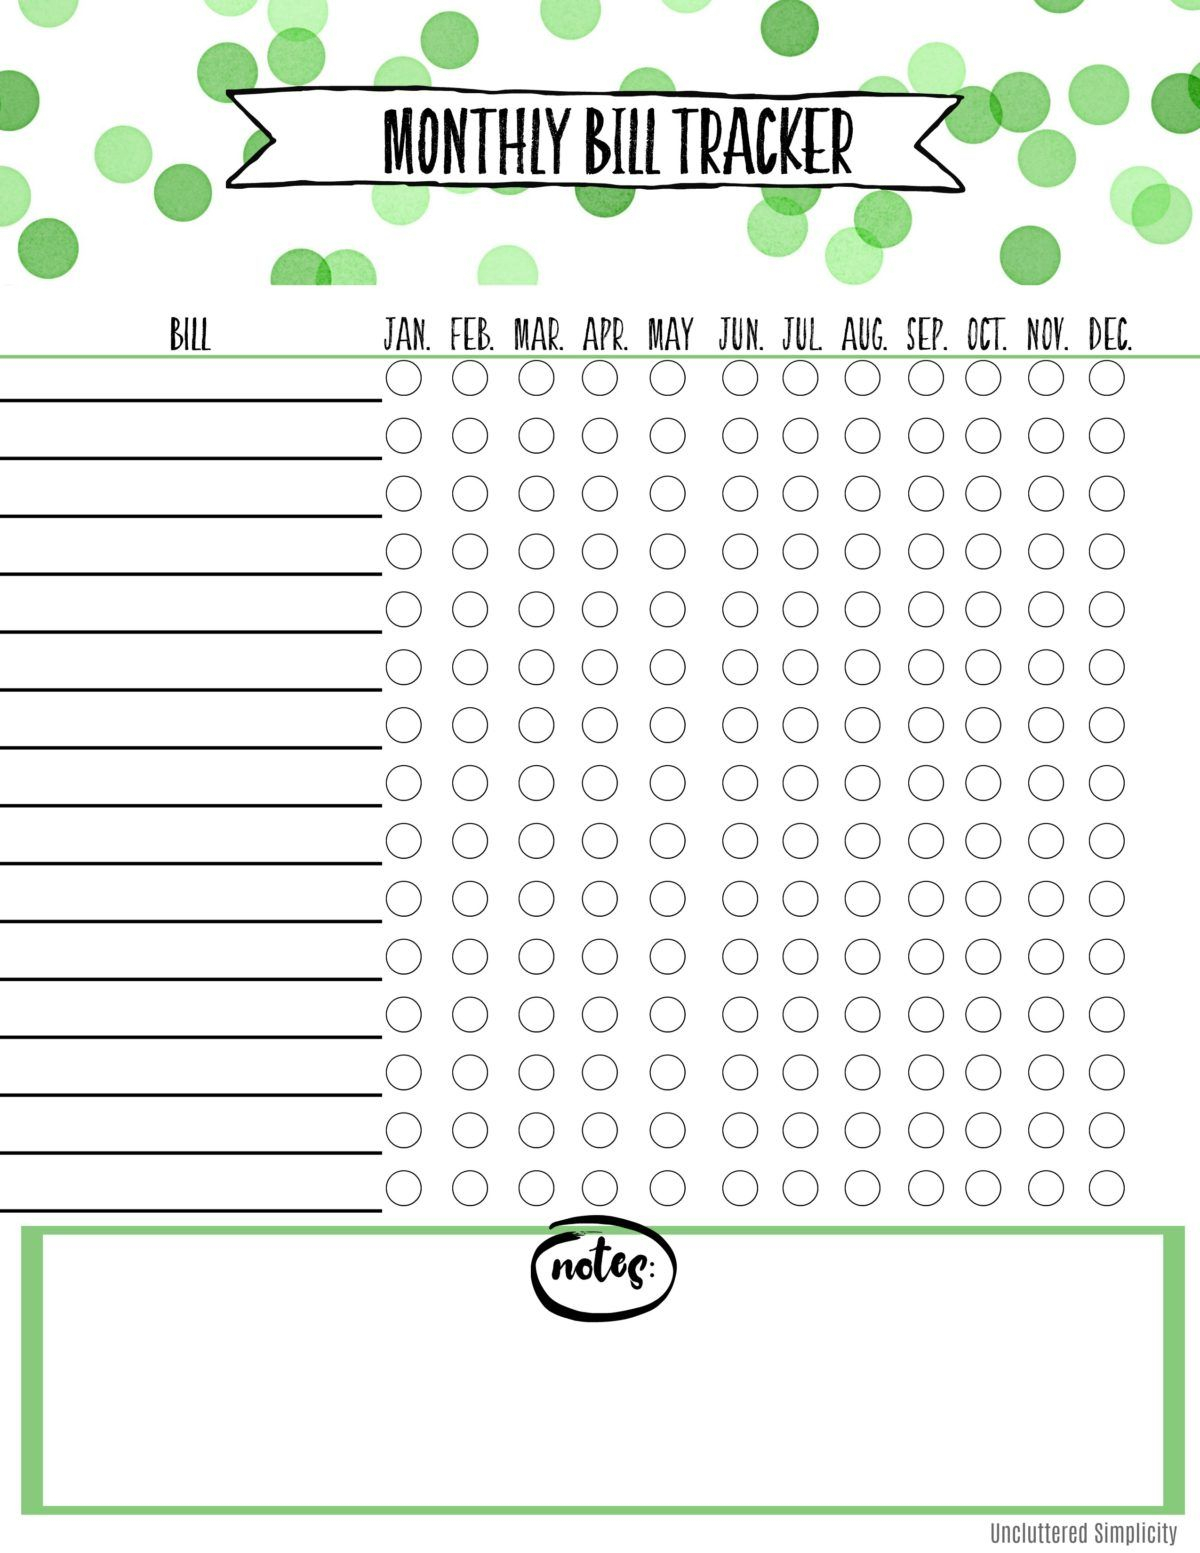 Free Printable Monthly Bill Payment Tracker: Organize Your